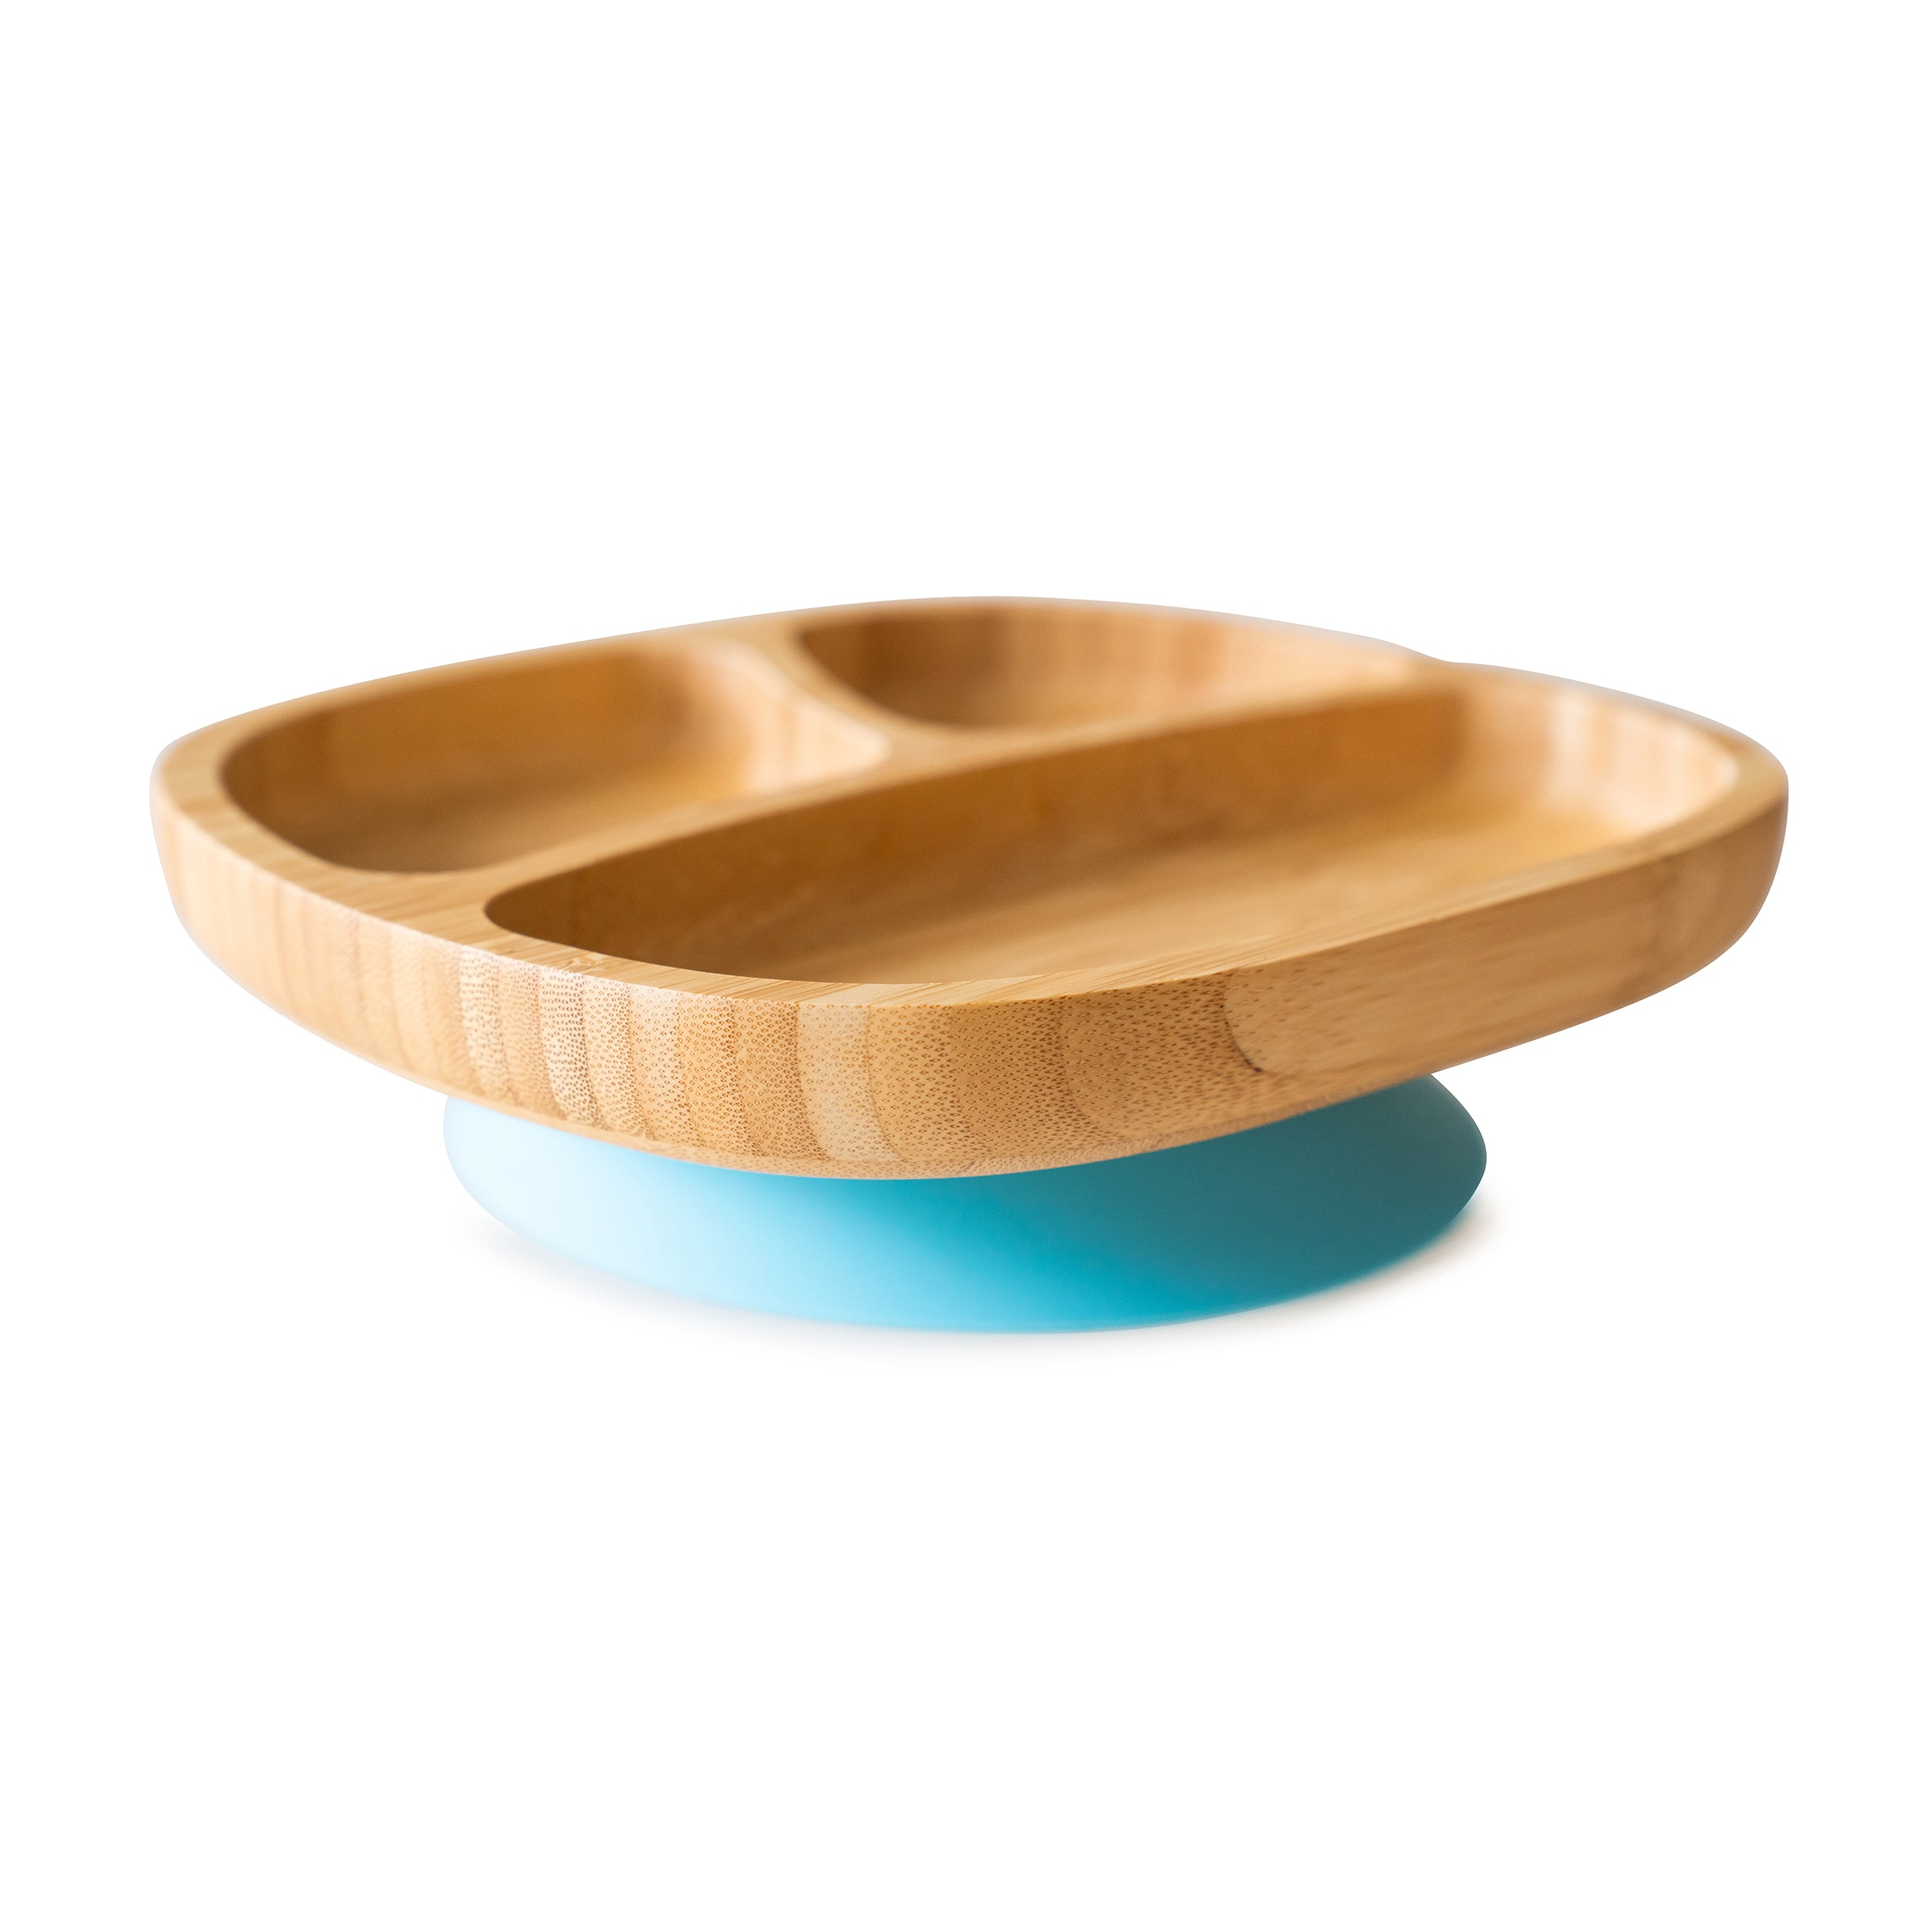 Toddler Bamboo Suction Plate - Pink/Blue